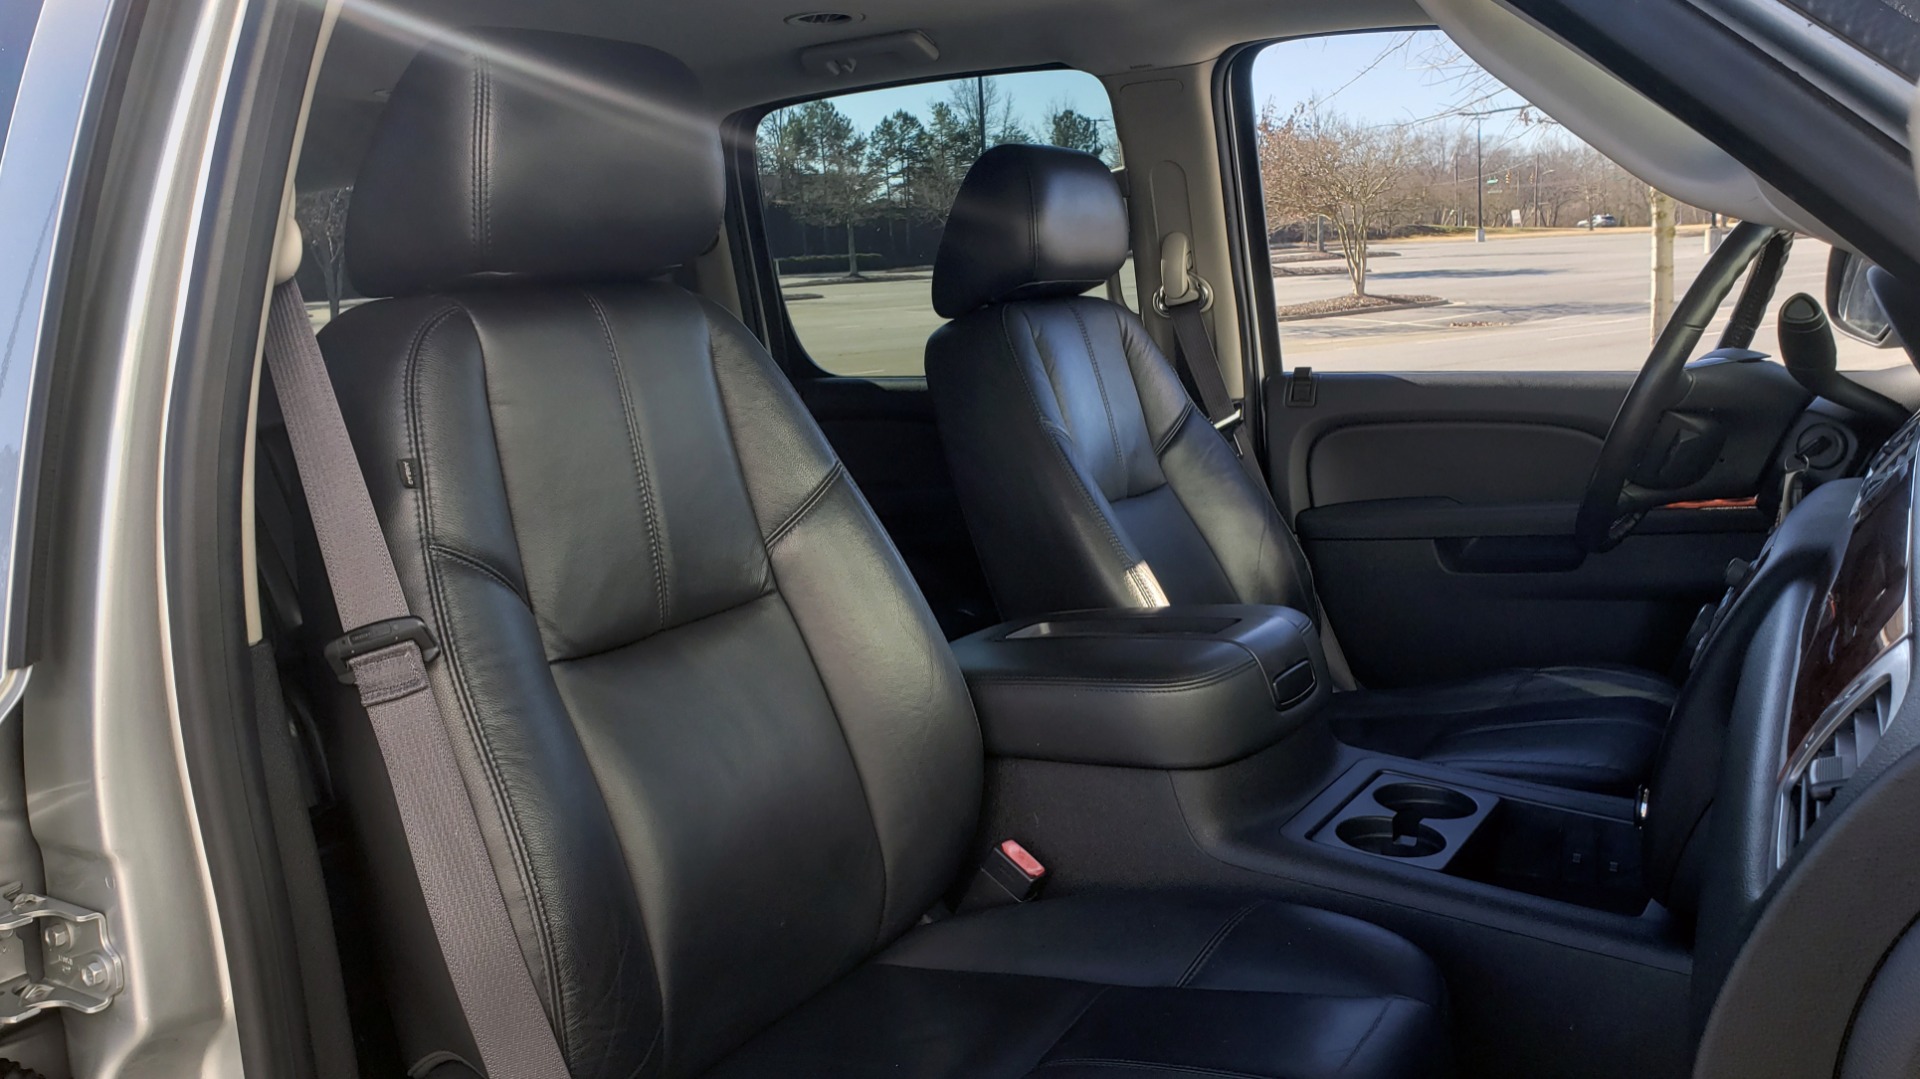 Used 2013 Chevrolet SUBURBAN LT / 2WD / 5.3L V8 / 6-SPD AUTO / LEATHER 3-ROW SEATS for sale Sold at Formula Imports in Charlotte NC 28227 62